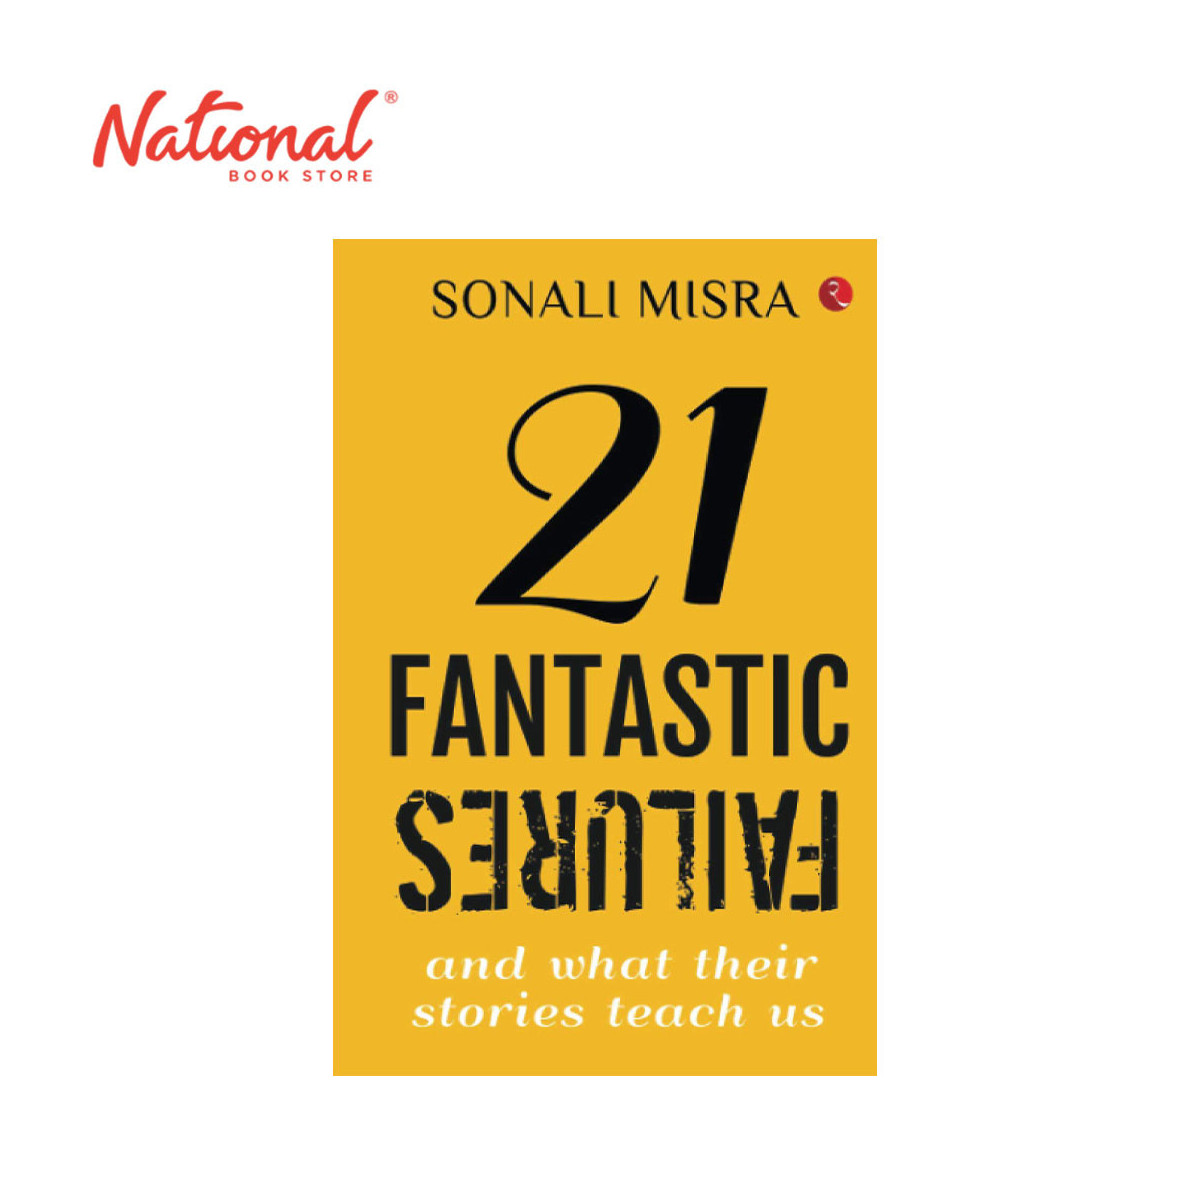 21 Fantastic Failures: and What their Stories Teach Us by Sonali Misra - Trade Paperback - Biography